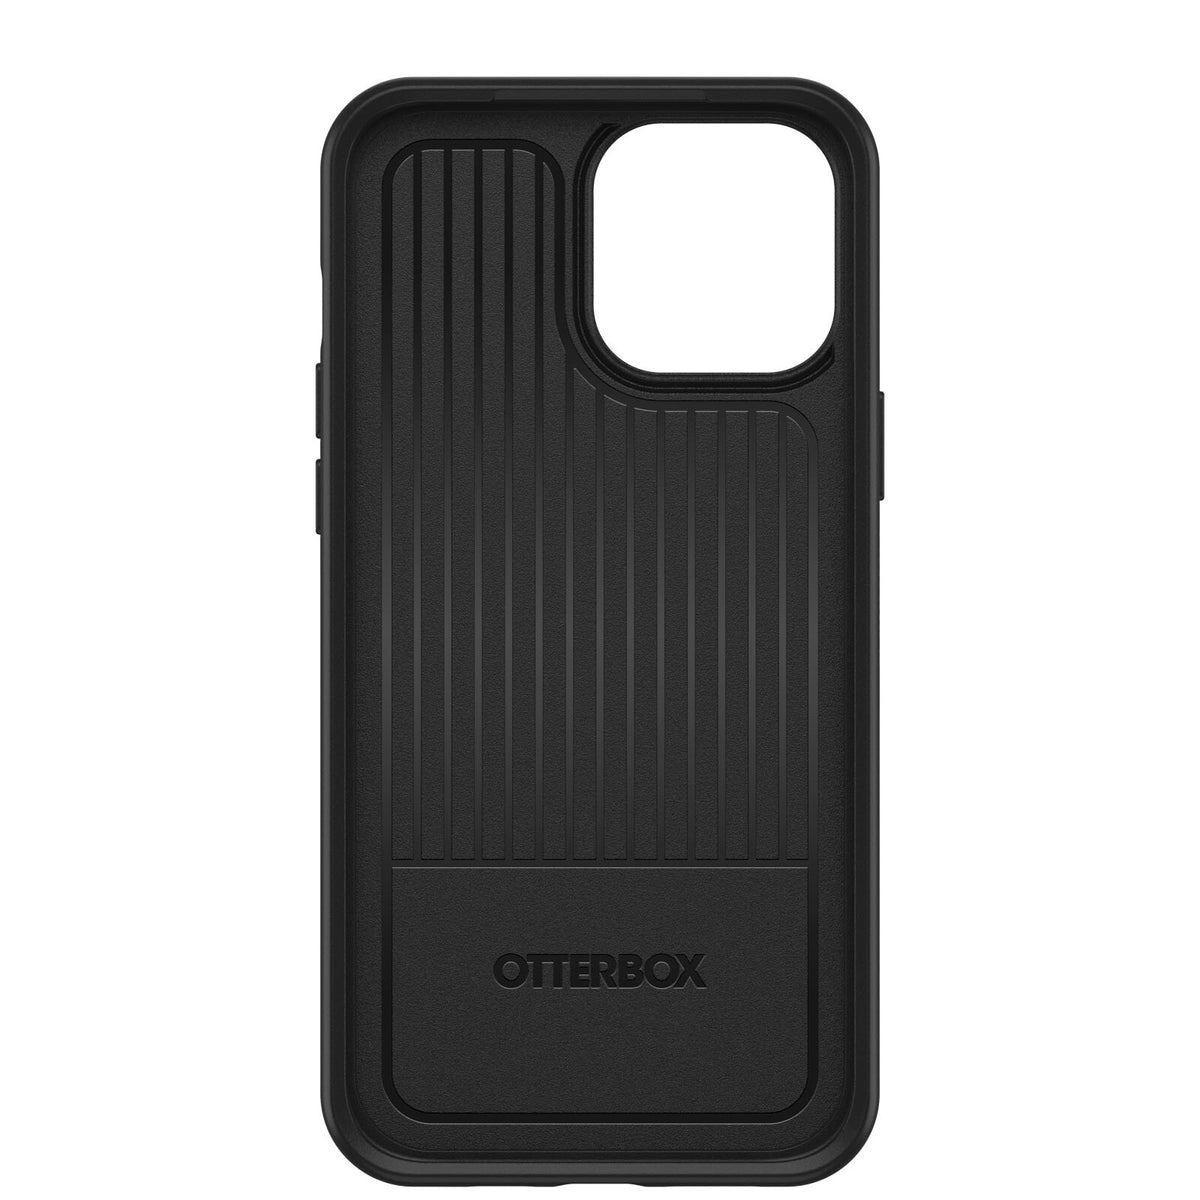 OtterBox Symmetry Series for iPhone 13 Pro Max / 12 Pro Max in Black - No Packaging